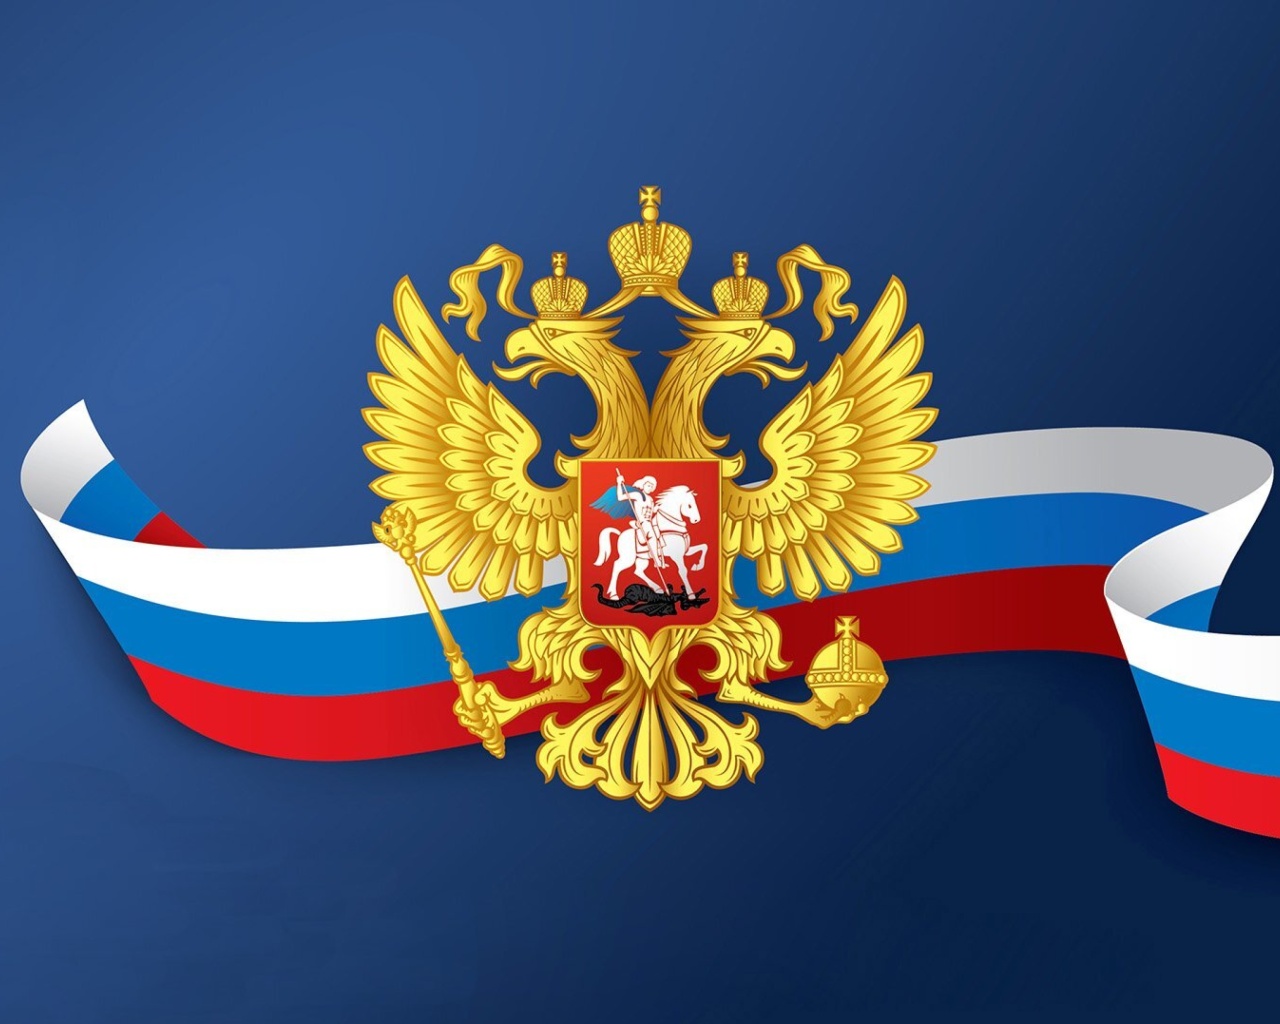 Russian coat of arms and flag wallpaper 1280x1024